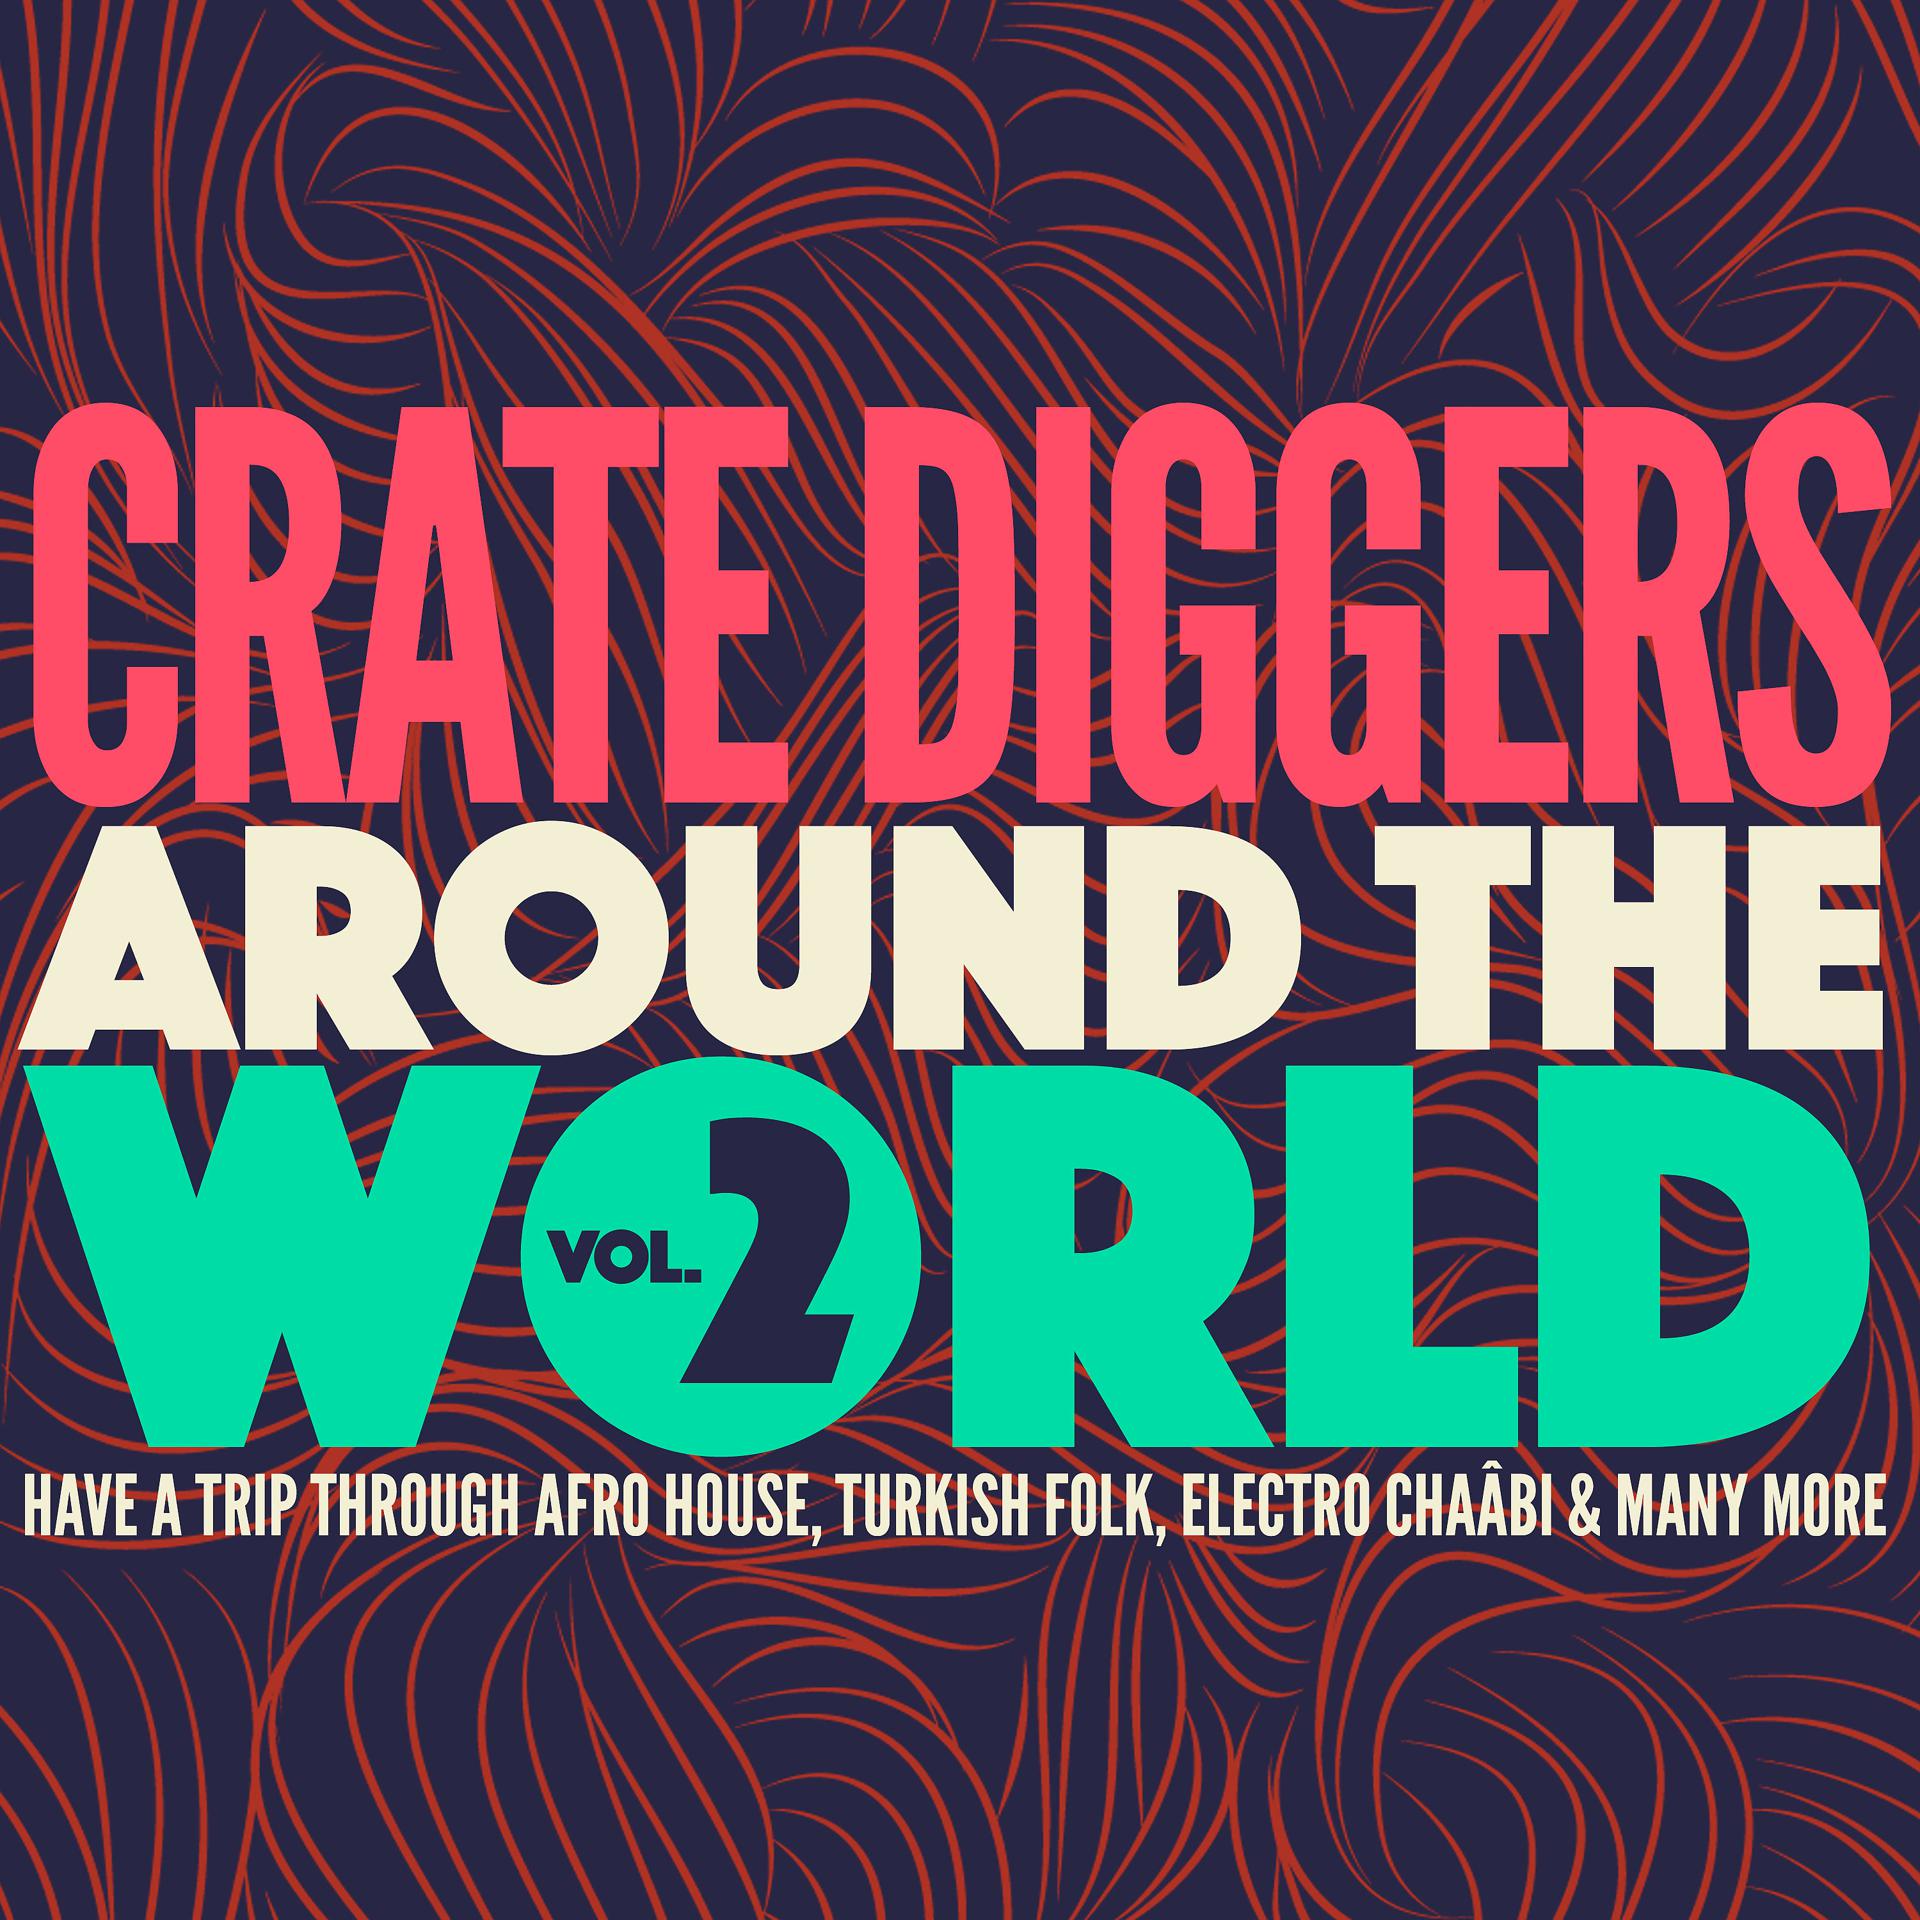 Постер альбома Crate Diggers Around the World, Vol. 2 (Have a Trip Through Afro House, Turkish Folk, Electro Chaâbi & Many More)